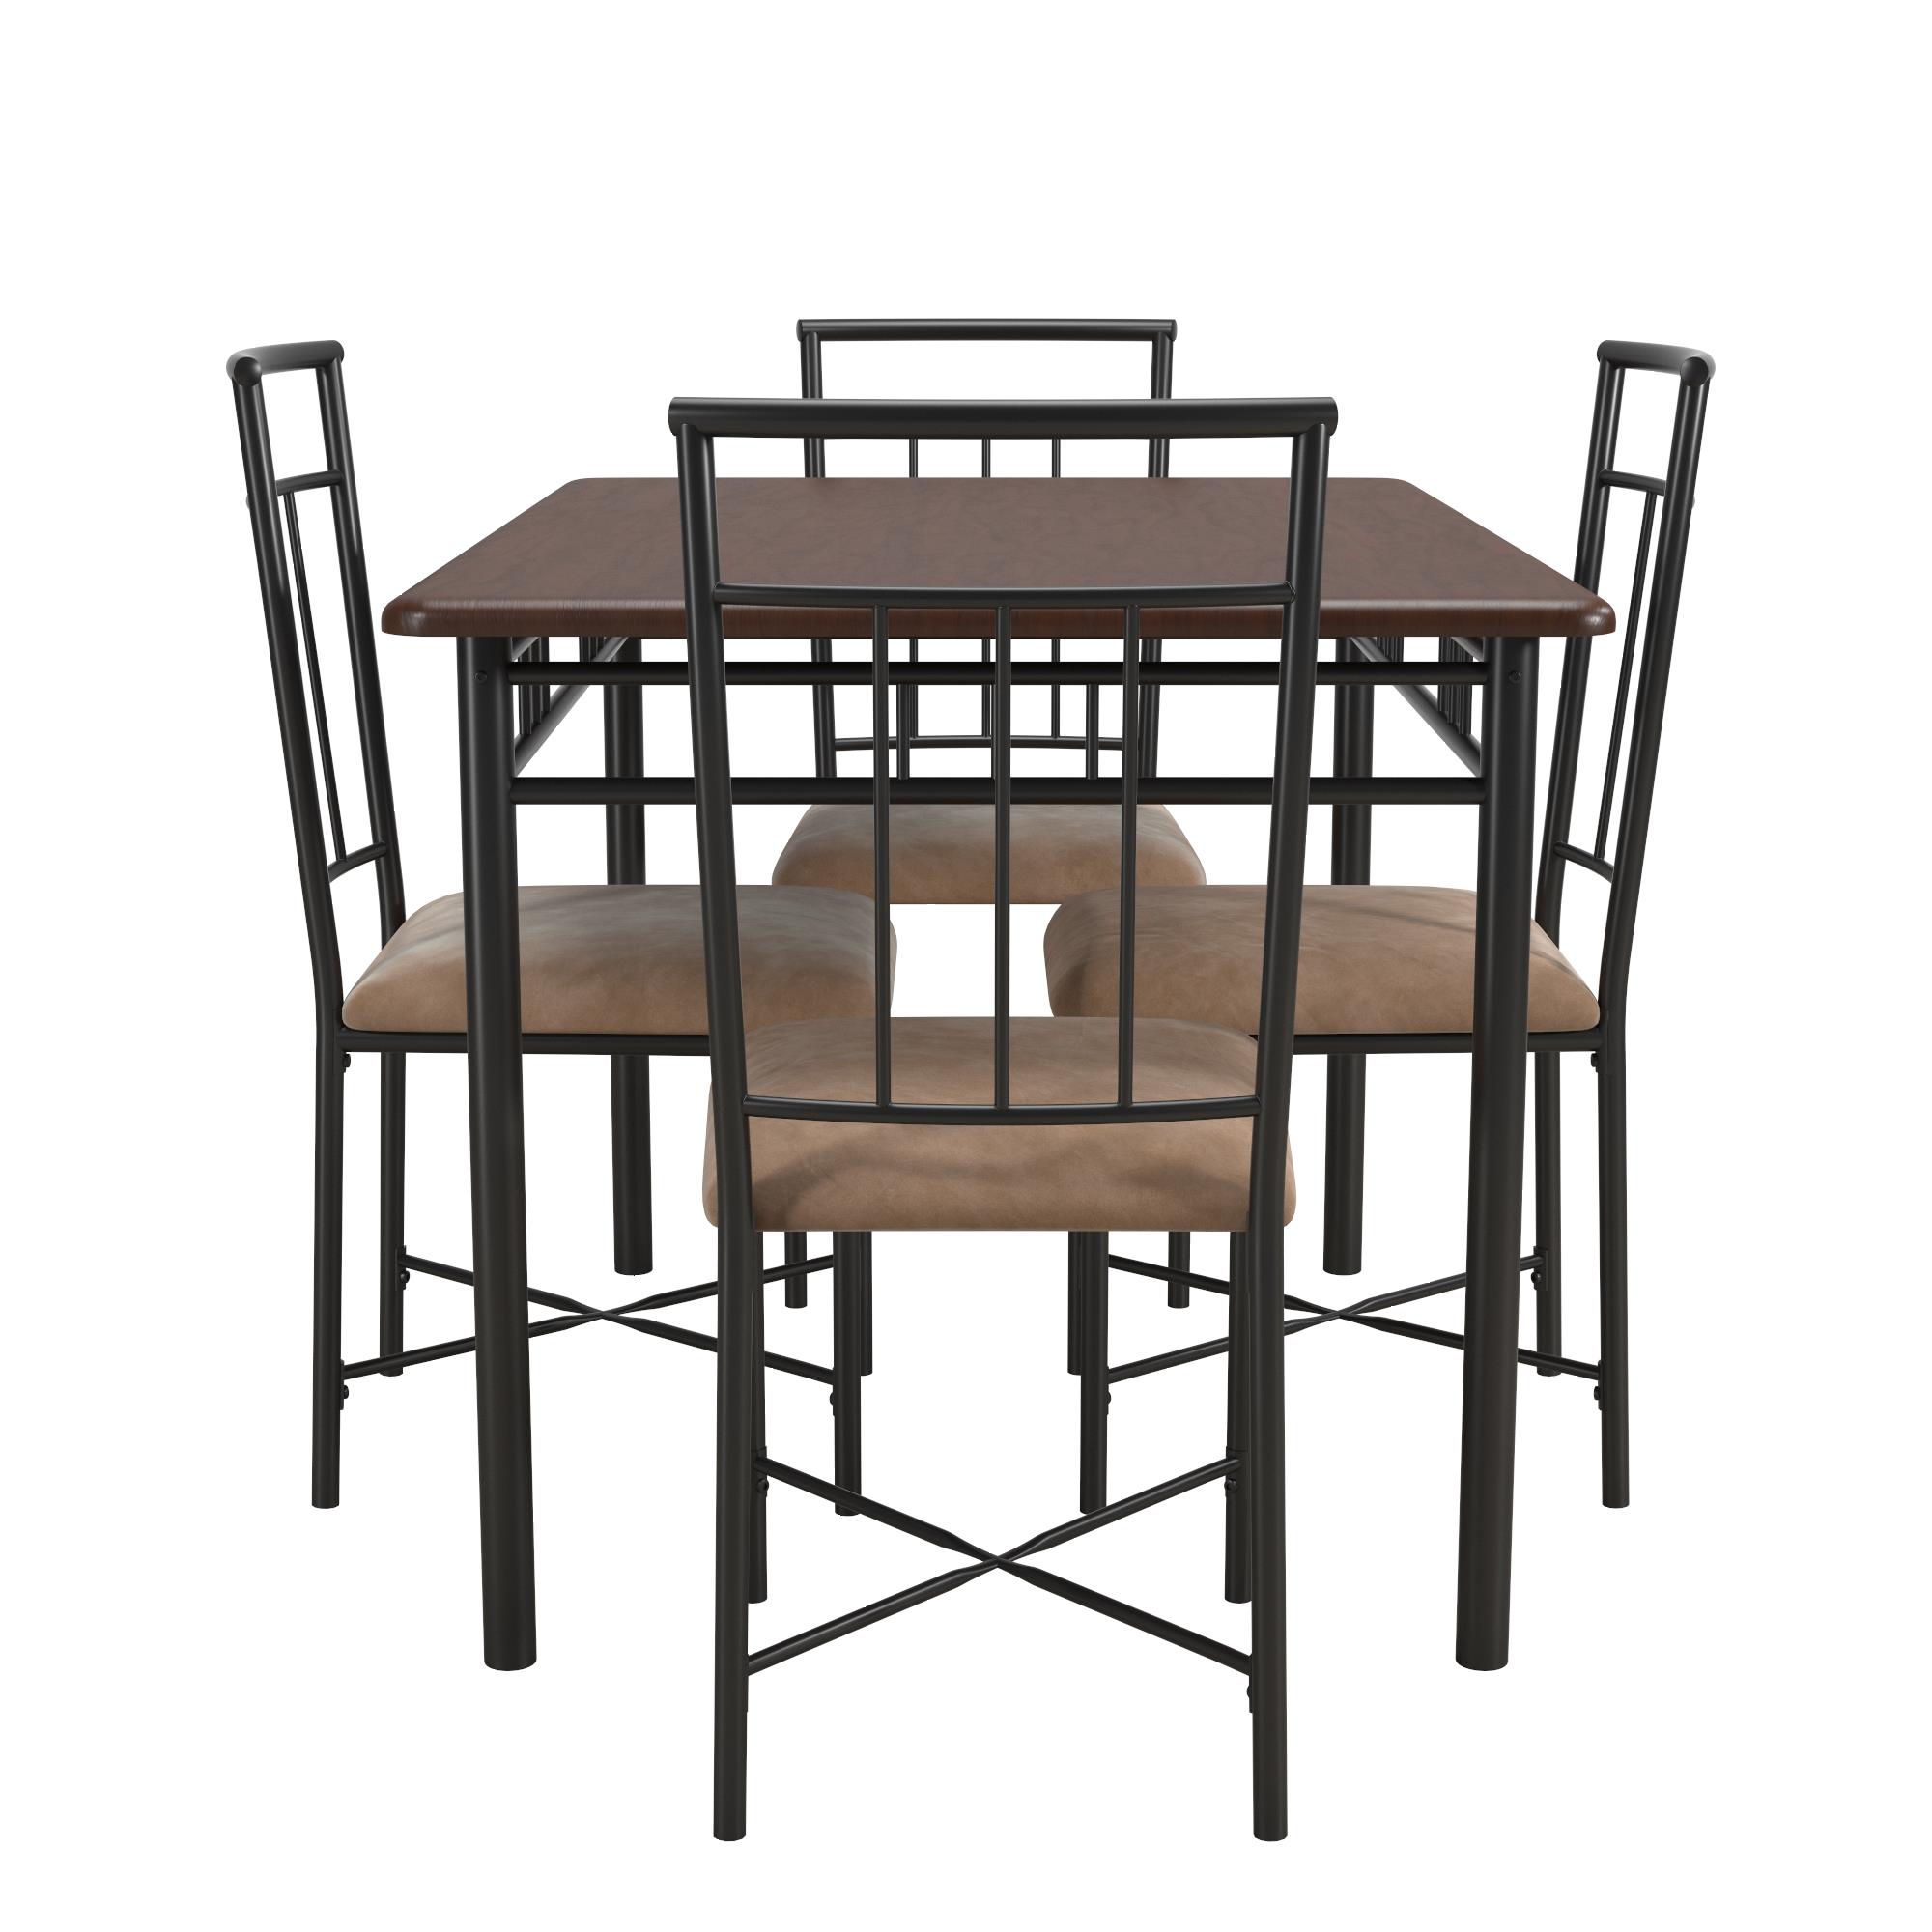 Mainstays Louise Traditional 5-Piece Wood & Metal Dining Set, Deep Walnut - image 7 of 22